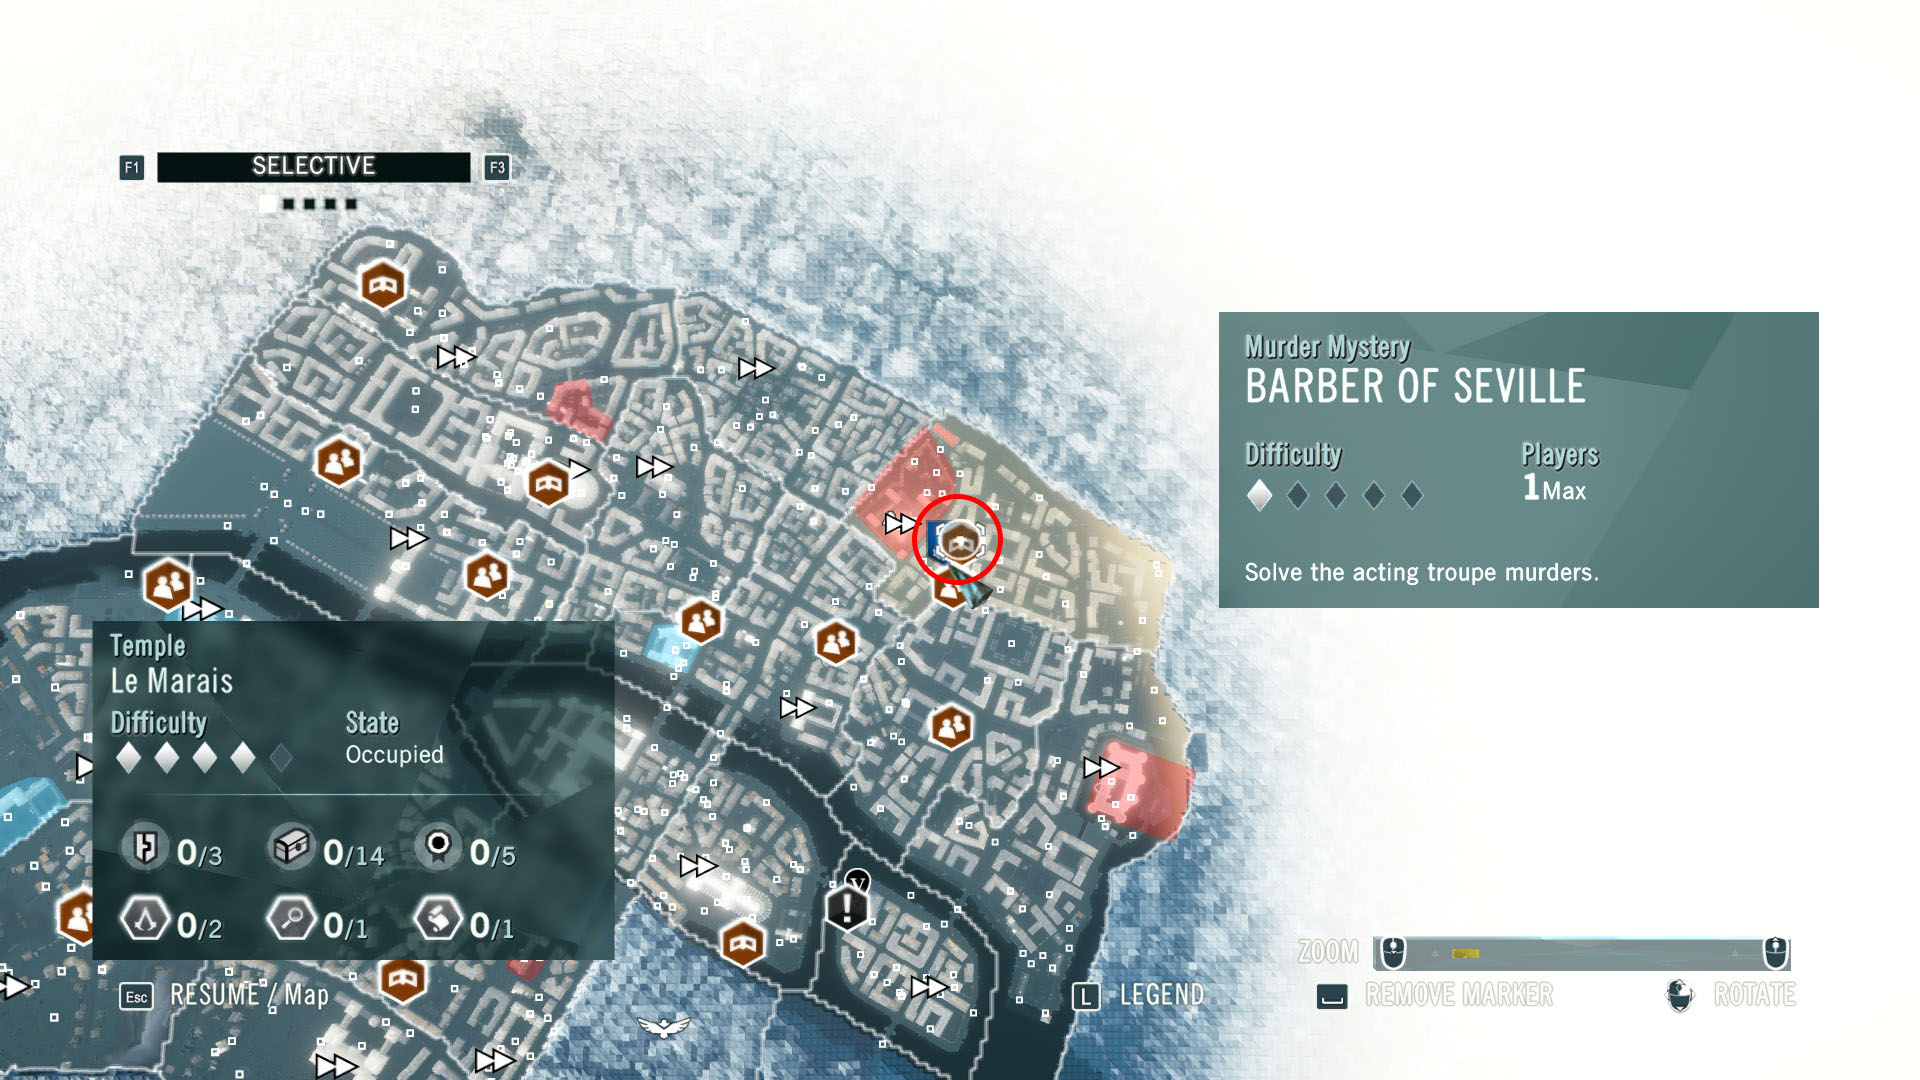 Assassin's Creed Unity Murder Mystery Guide + Location & Solution - Barber of Seville ⧫◊◊◊◊ - 8D85B87